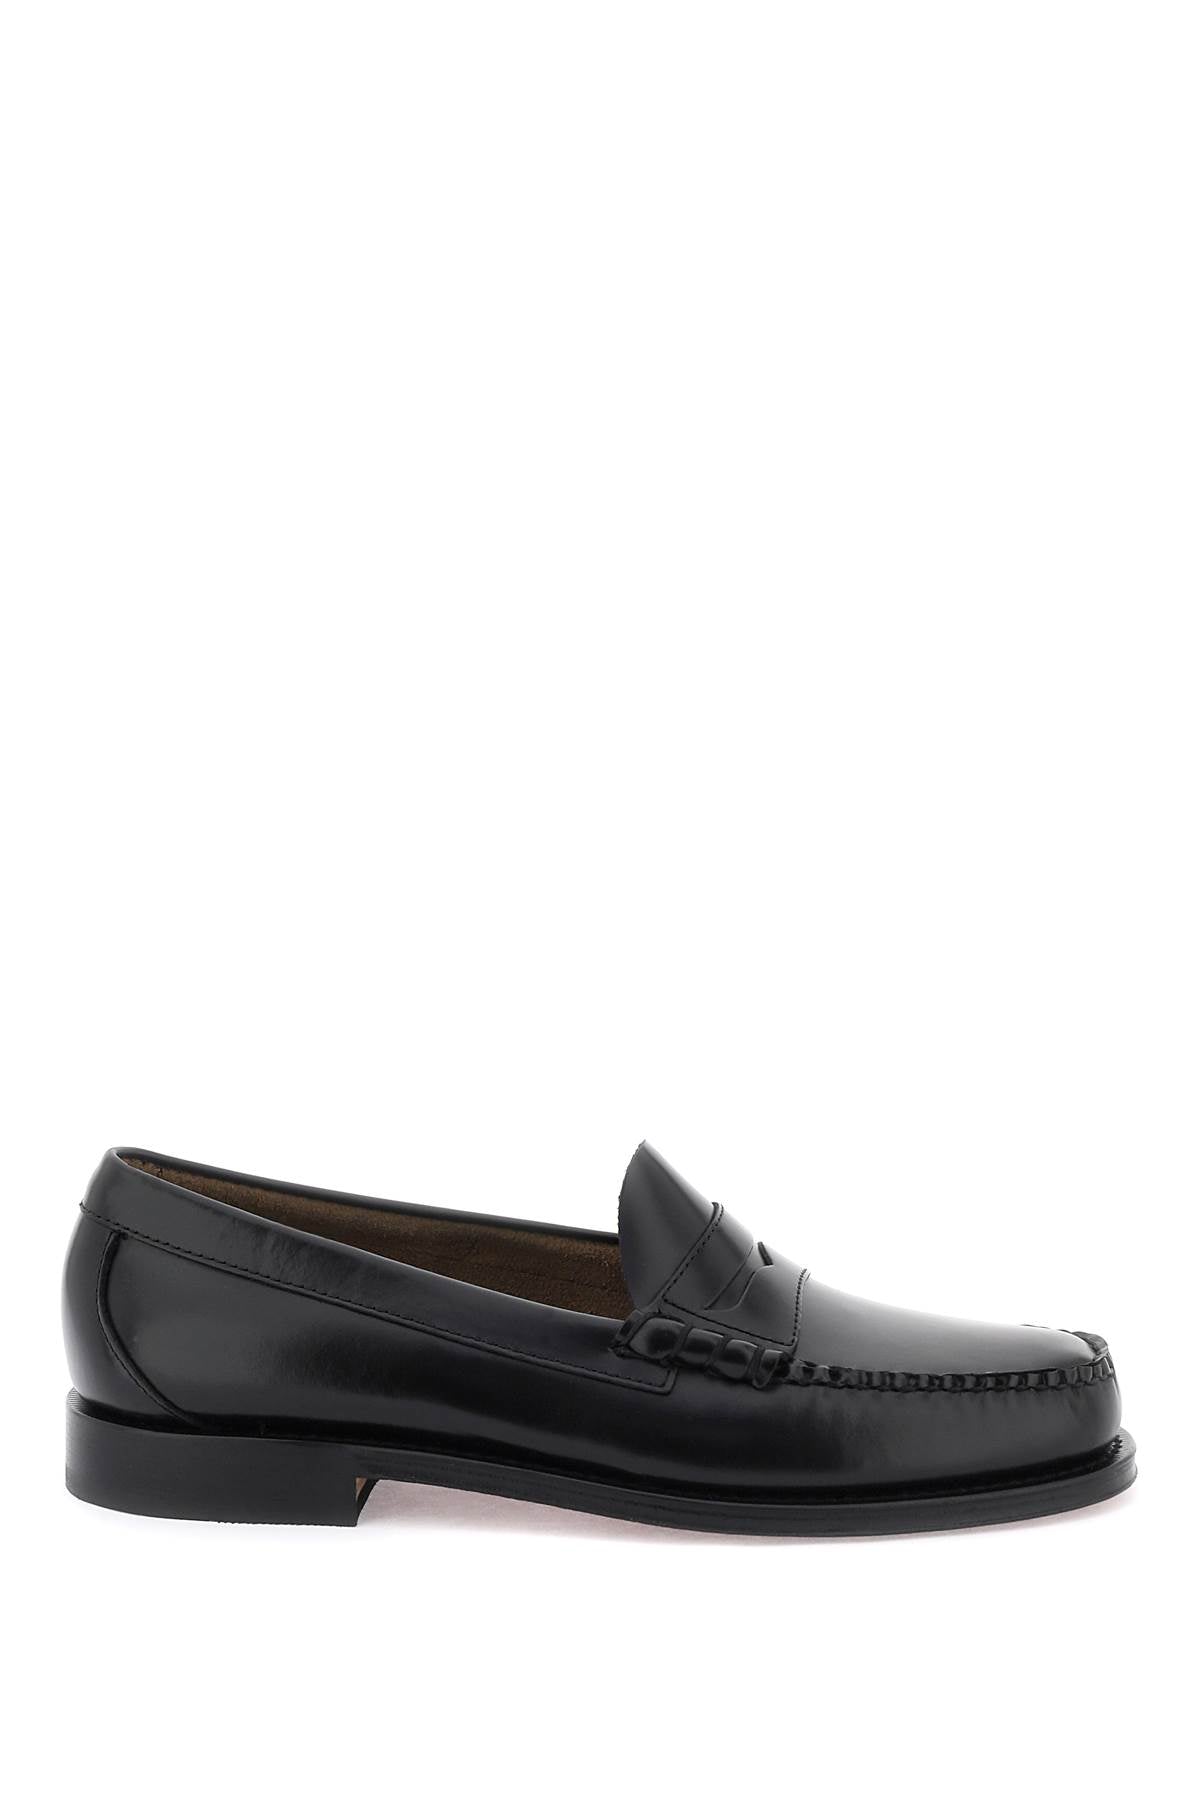 G.h. bass weejuns larson penny loafers-0